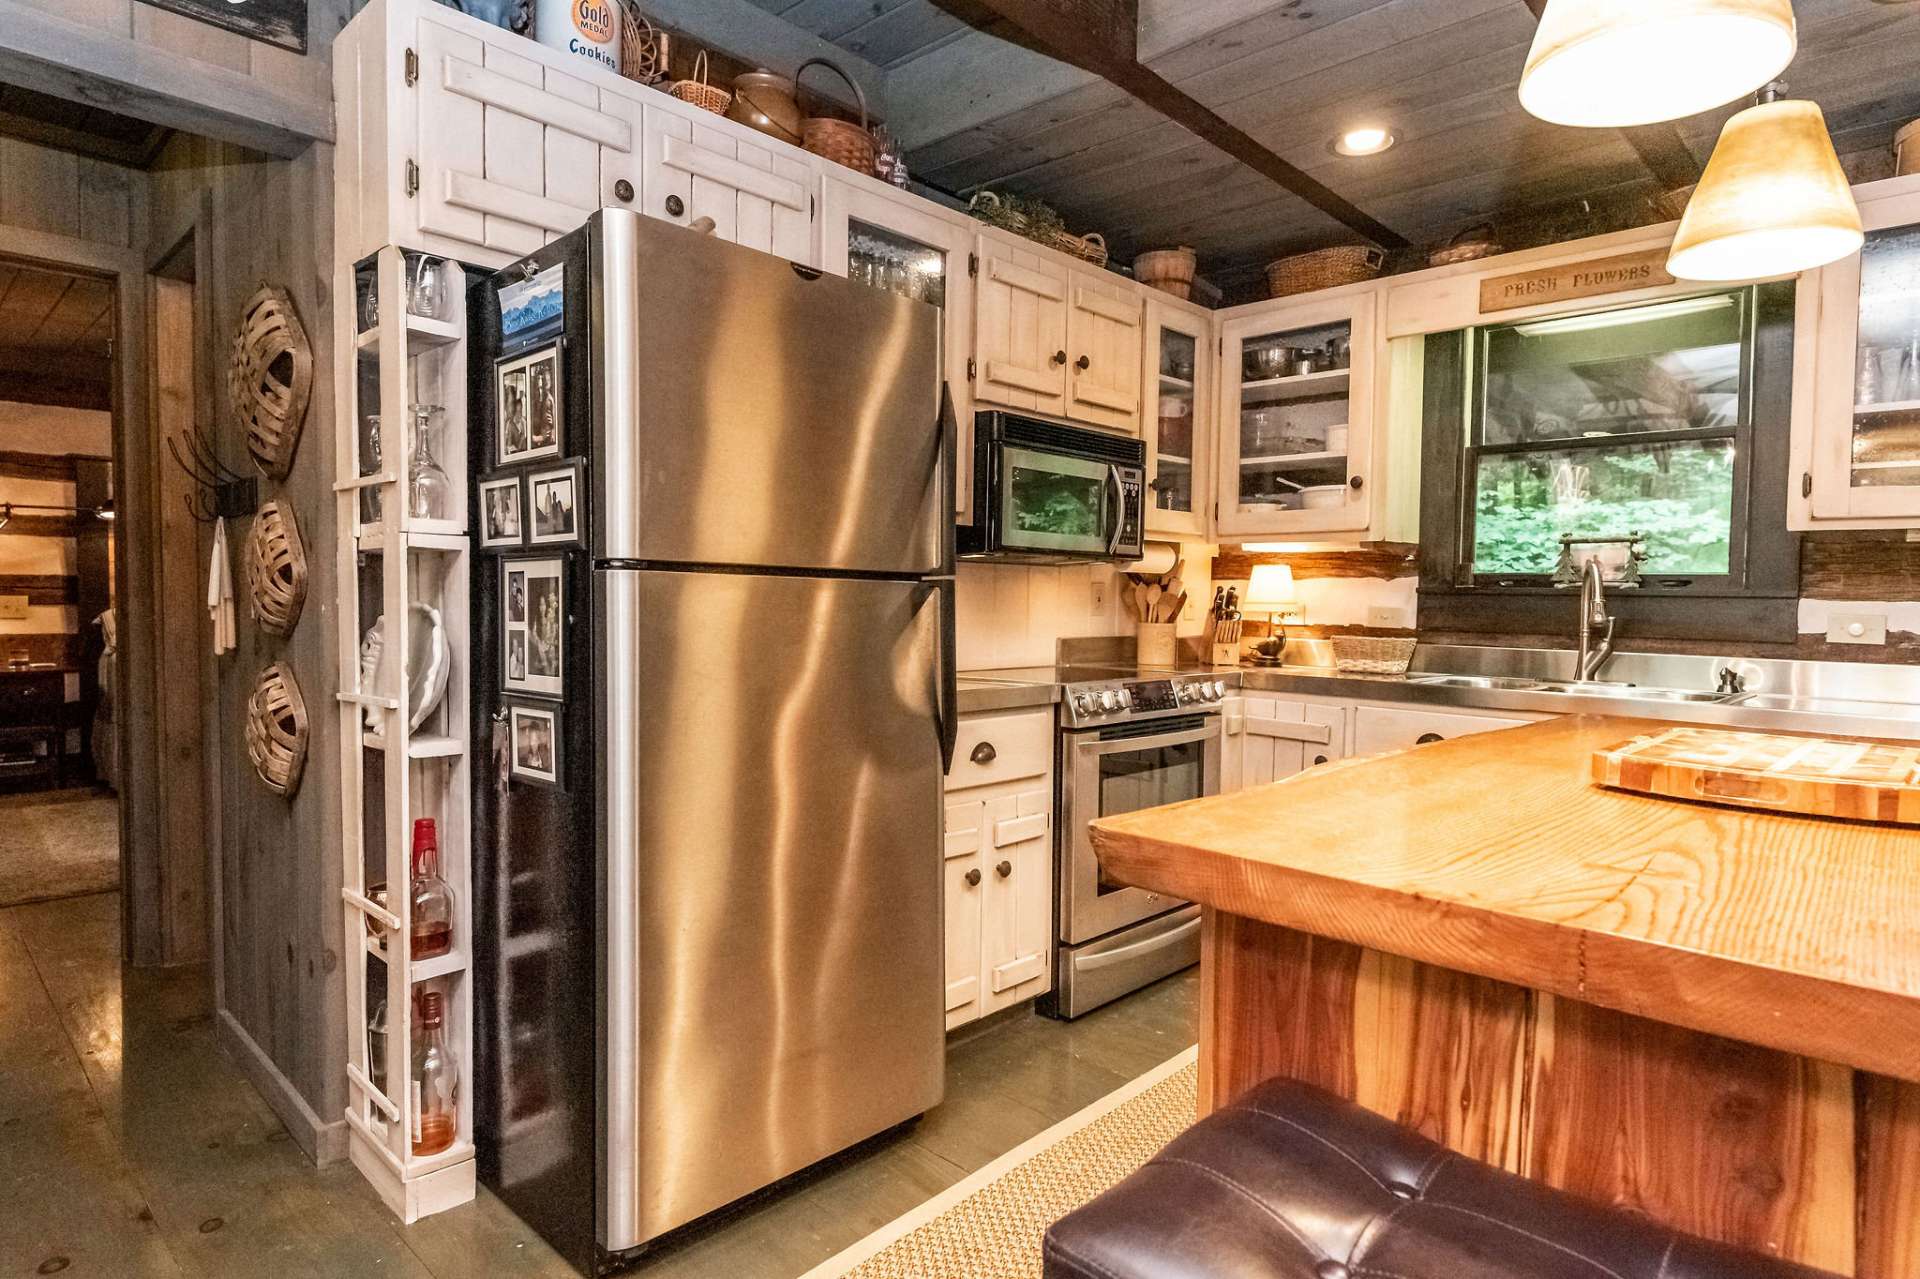 This kitchen intertwines modern with rustic in a fabulously creative way.